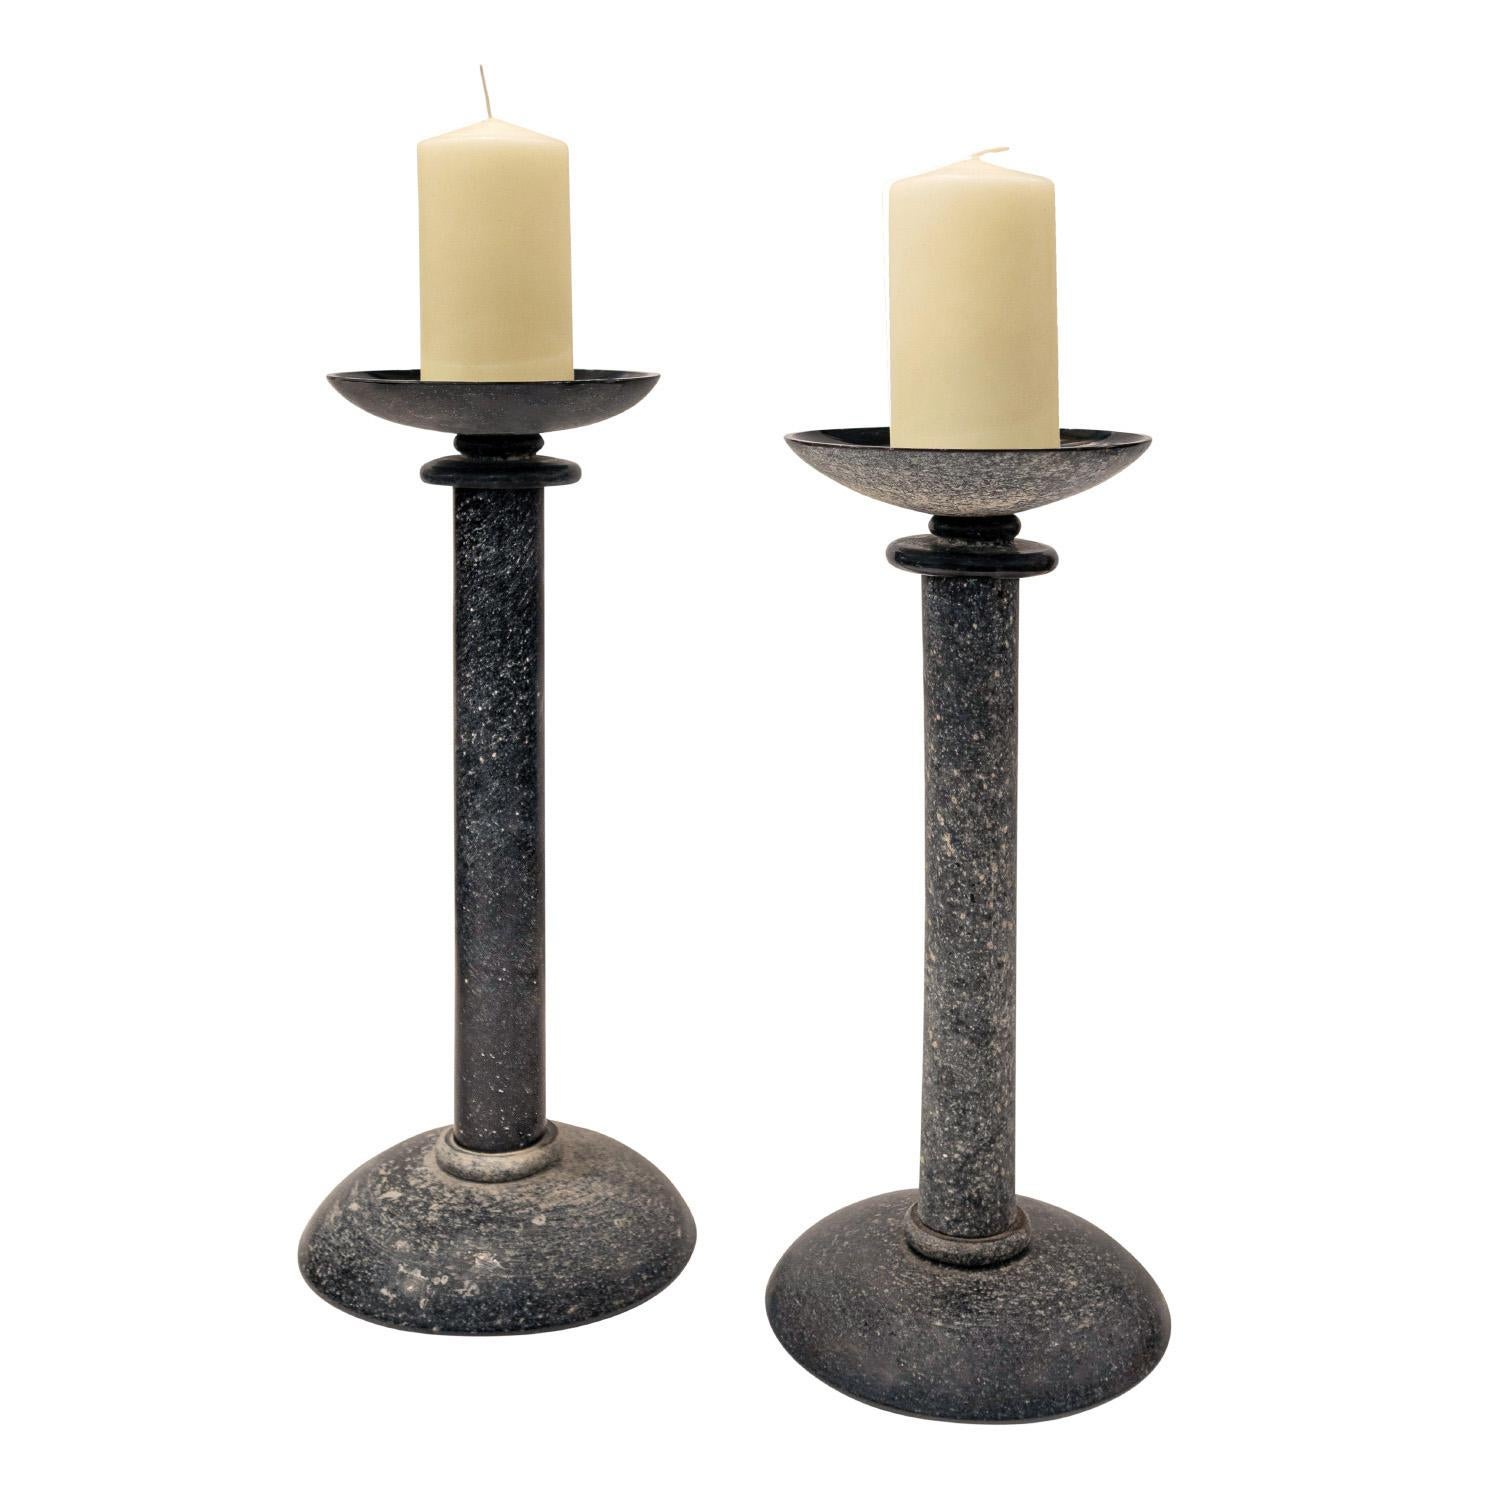 Rare pair of hand-blown black glass candle holders with scavo (rough) finish by Seguso Vetri d'Arte (Murano) for Karl Springer, American 1980's (Signed on bottom “Karl Springer”).  The black glass versions are the rarest.  These are meticulously